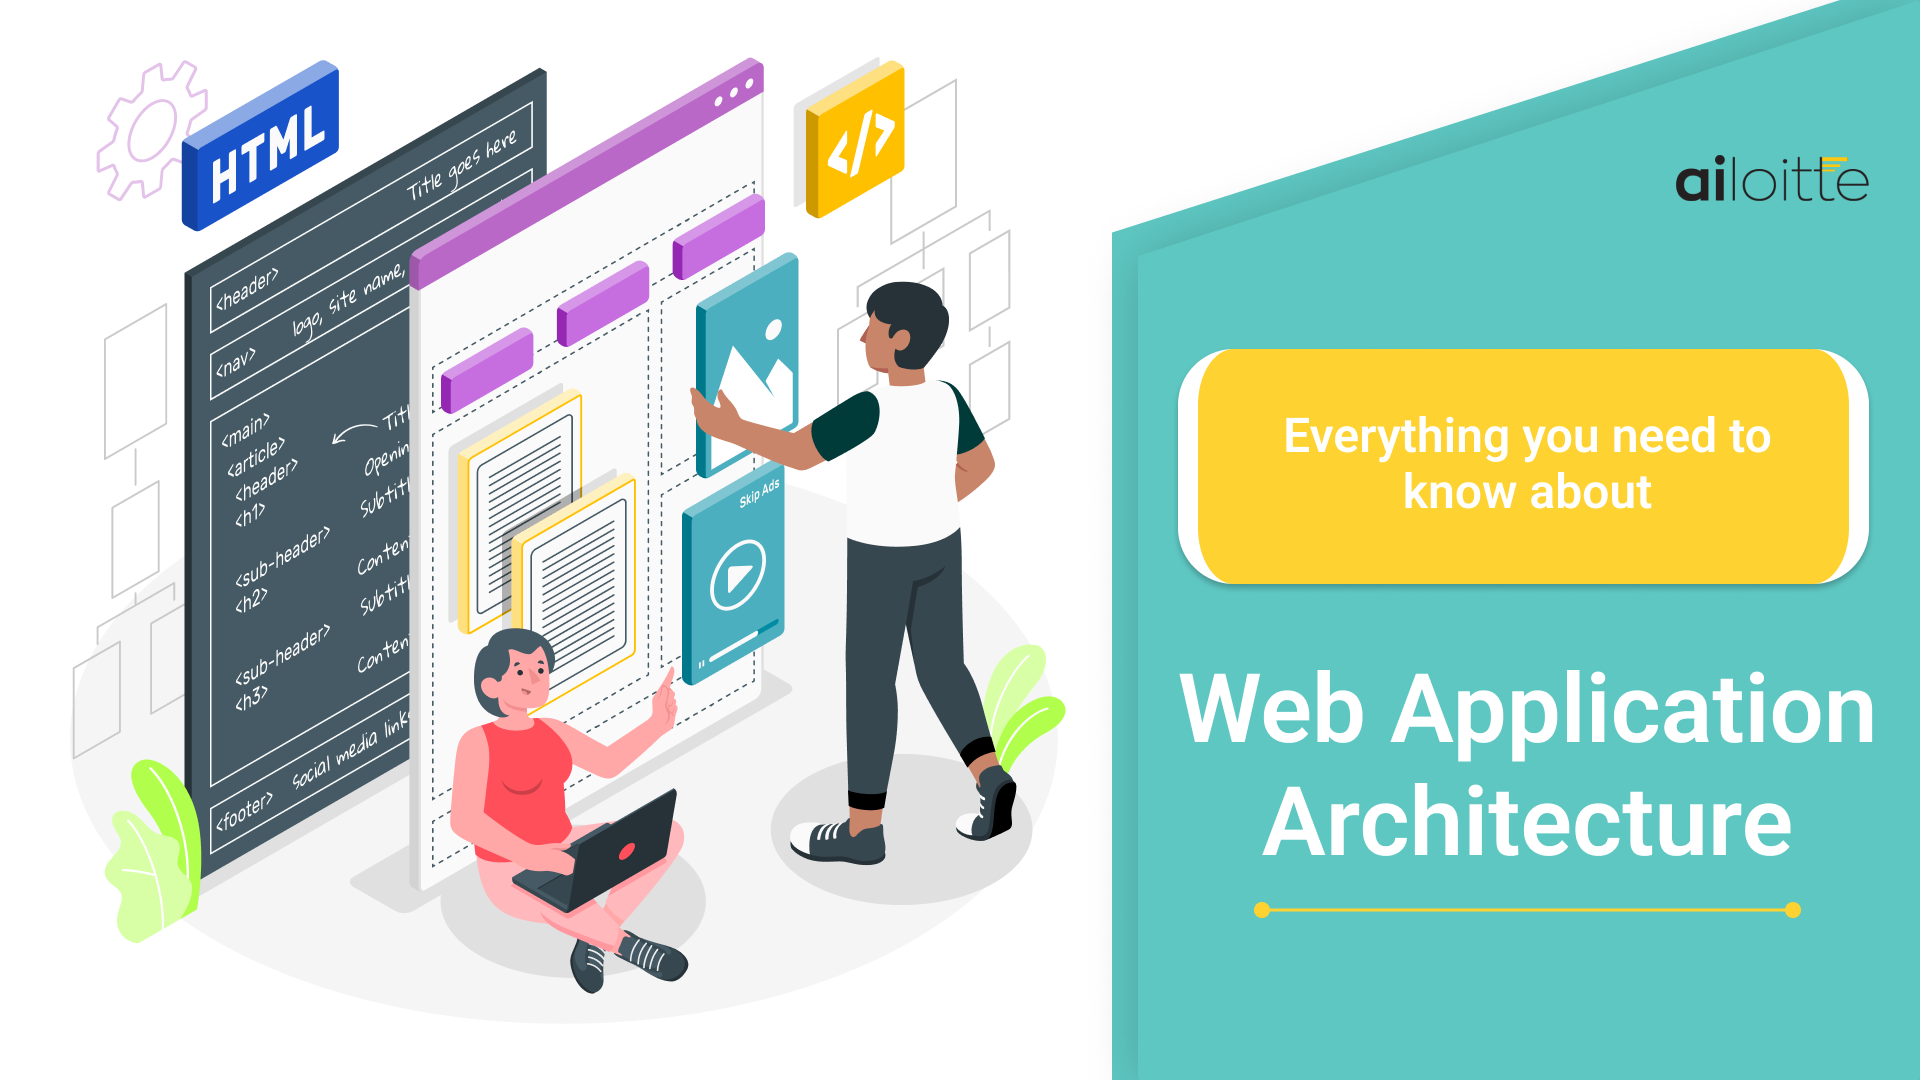 https://www.ailoitte.com/blog/wp-content/uploads/sites/2/2022/08/Everything-you-need-to-know-about-Web-application-architecture-1.png